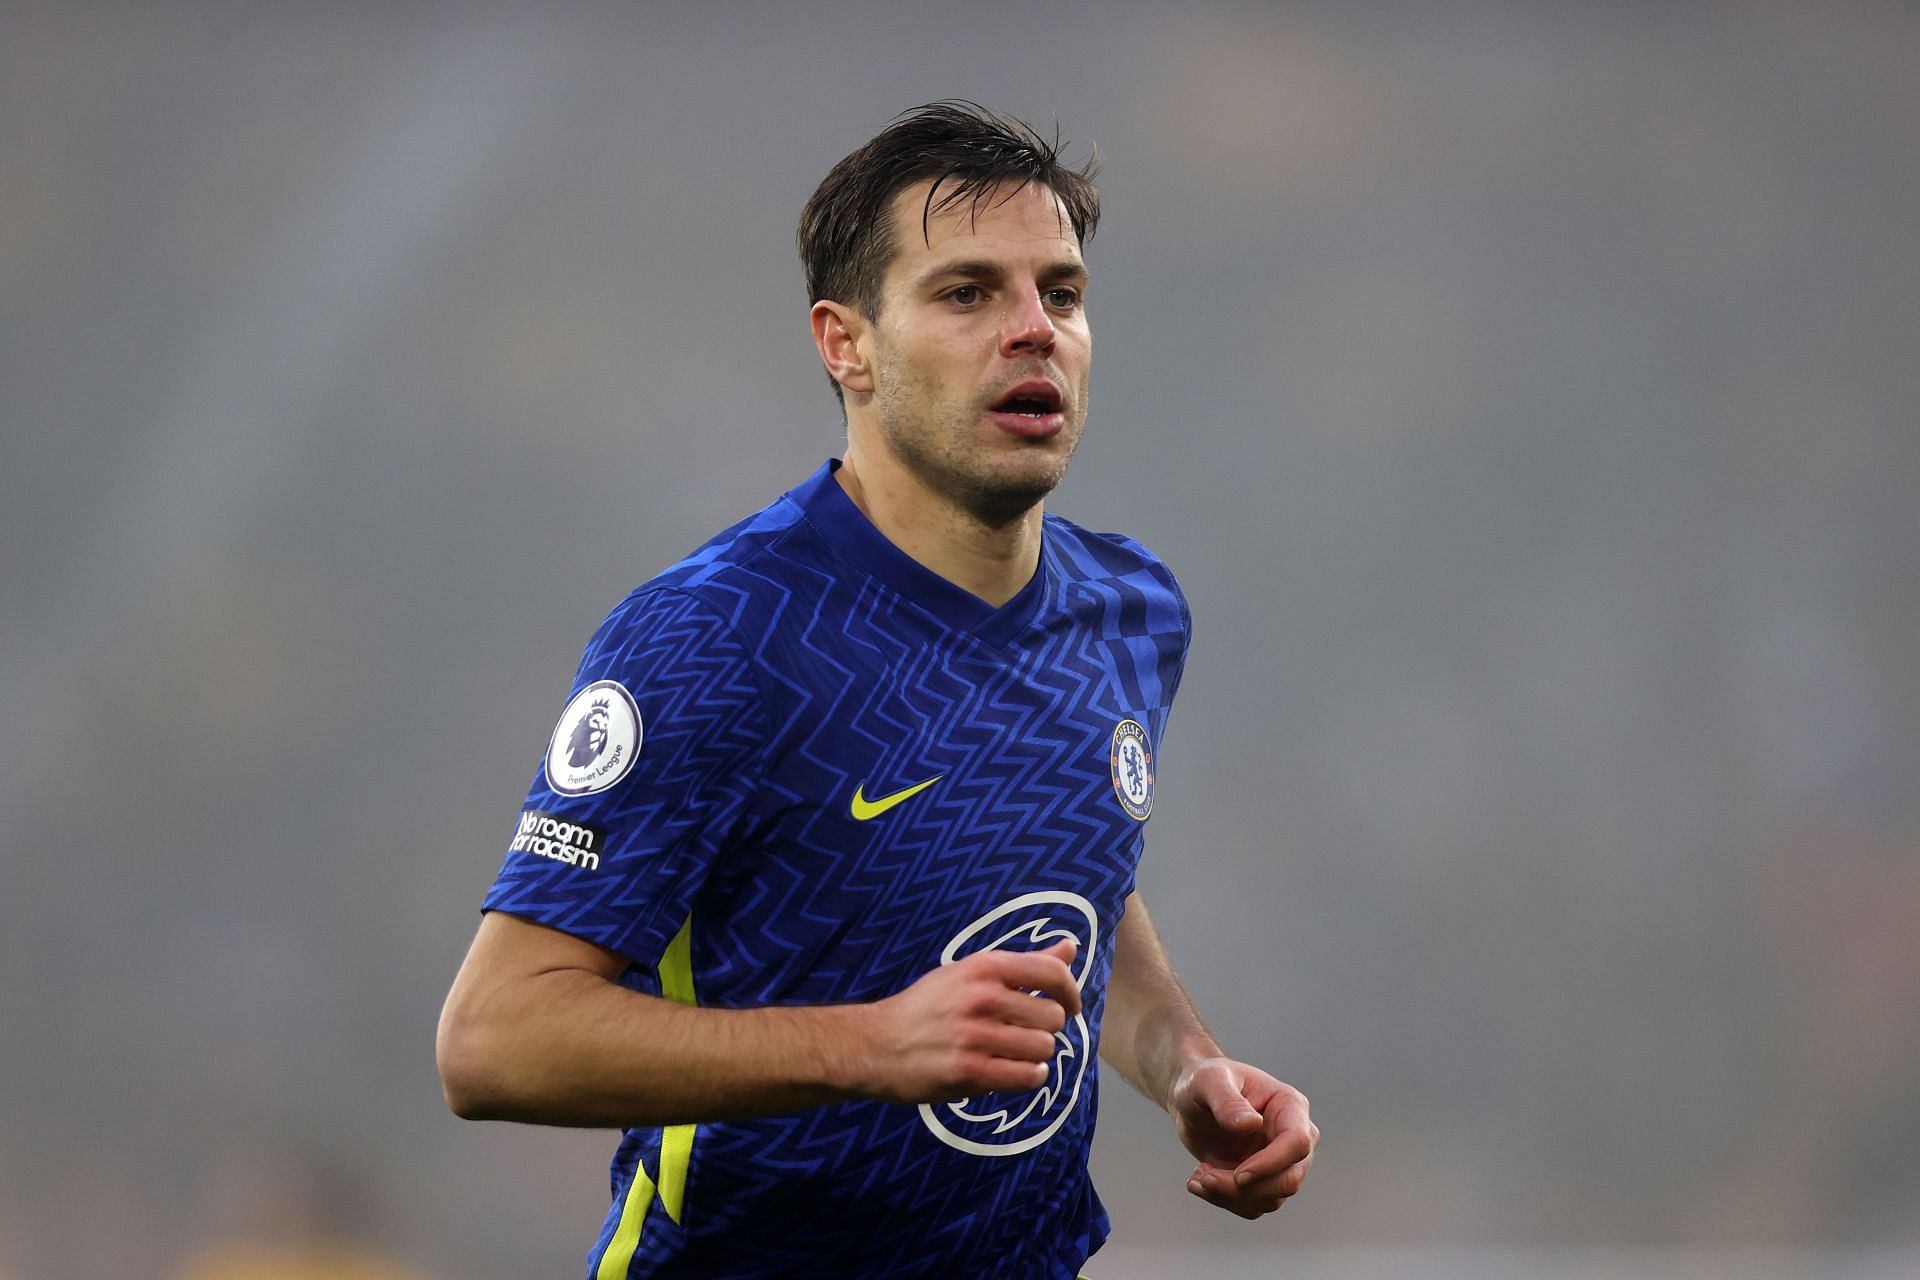 Atletico Madrid are planning to sign Azpilicueta in January.